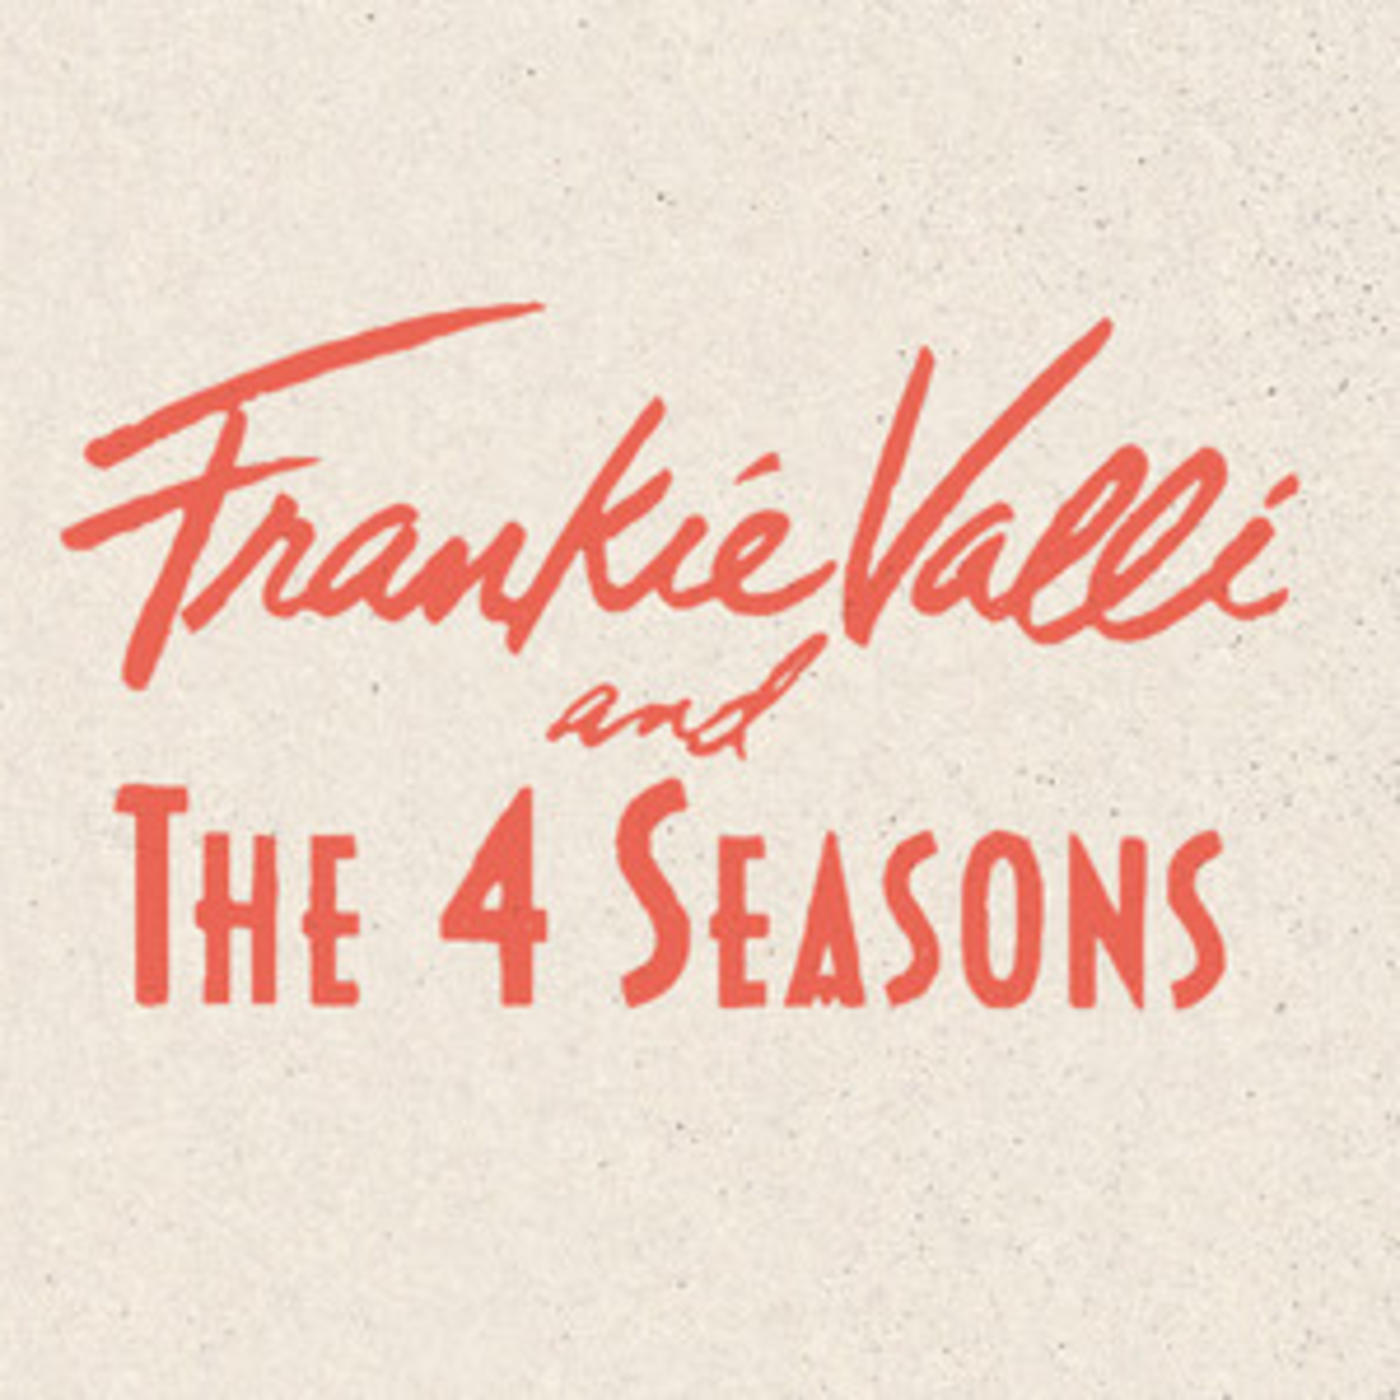 Frankie Valli & The 4 Seasons - The Playlist - December, 1963 (Oh What A Night), Sherry, Beggin'